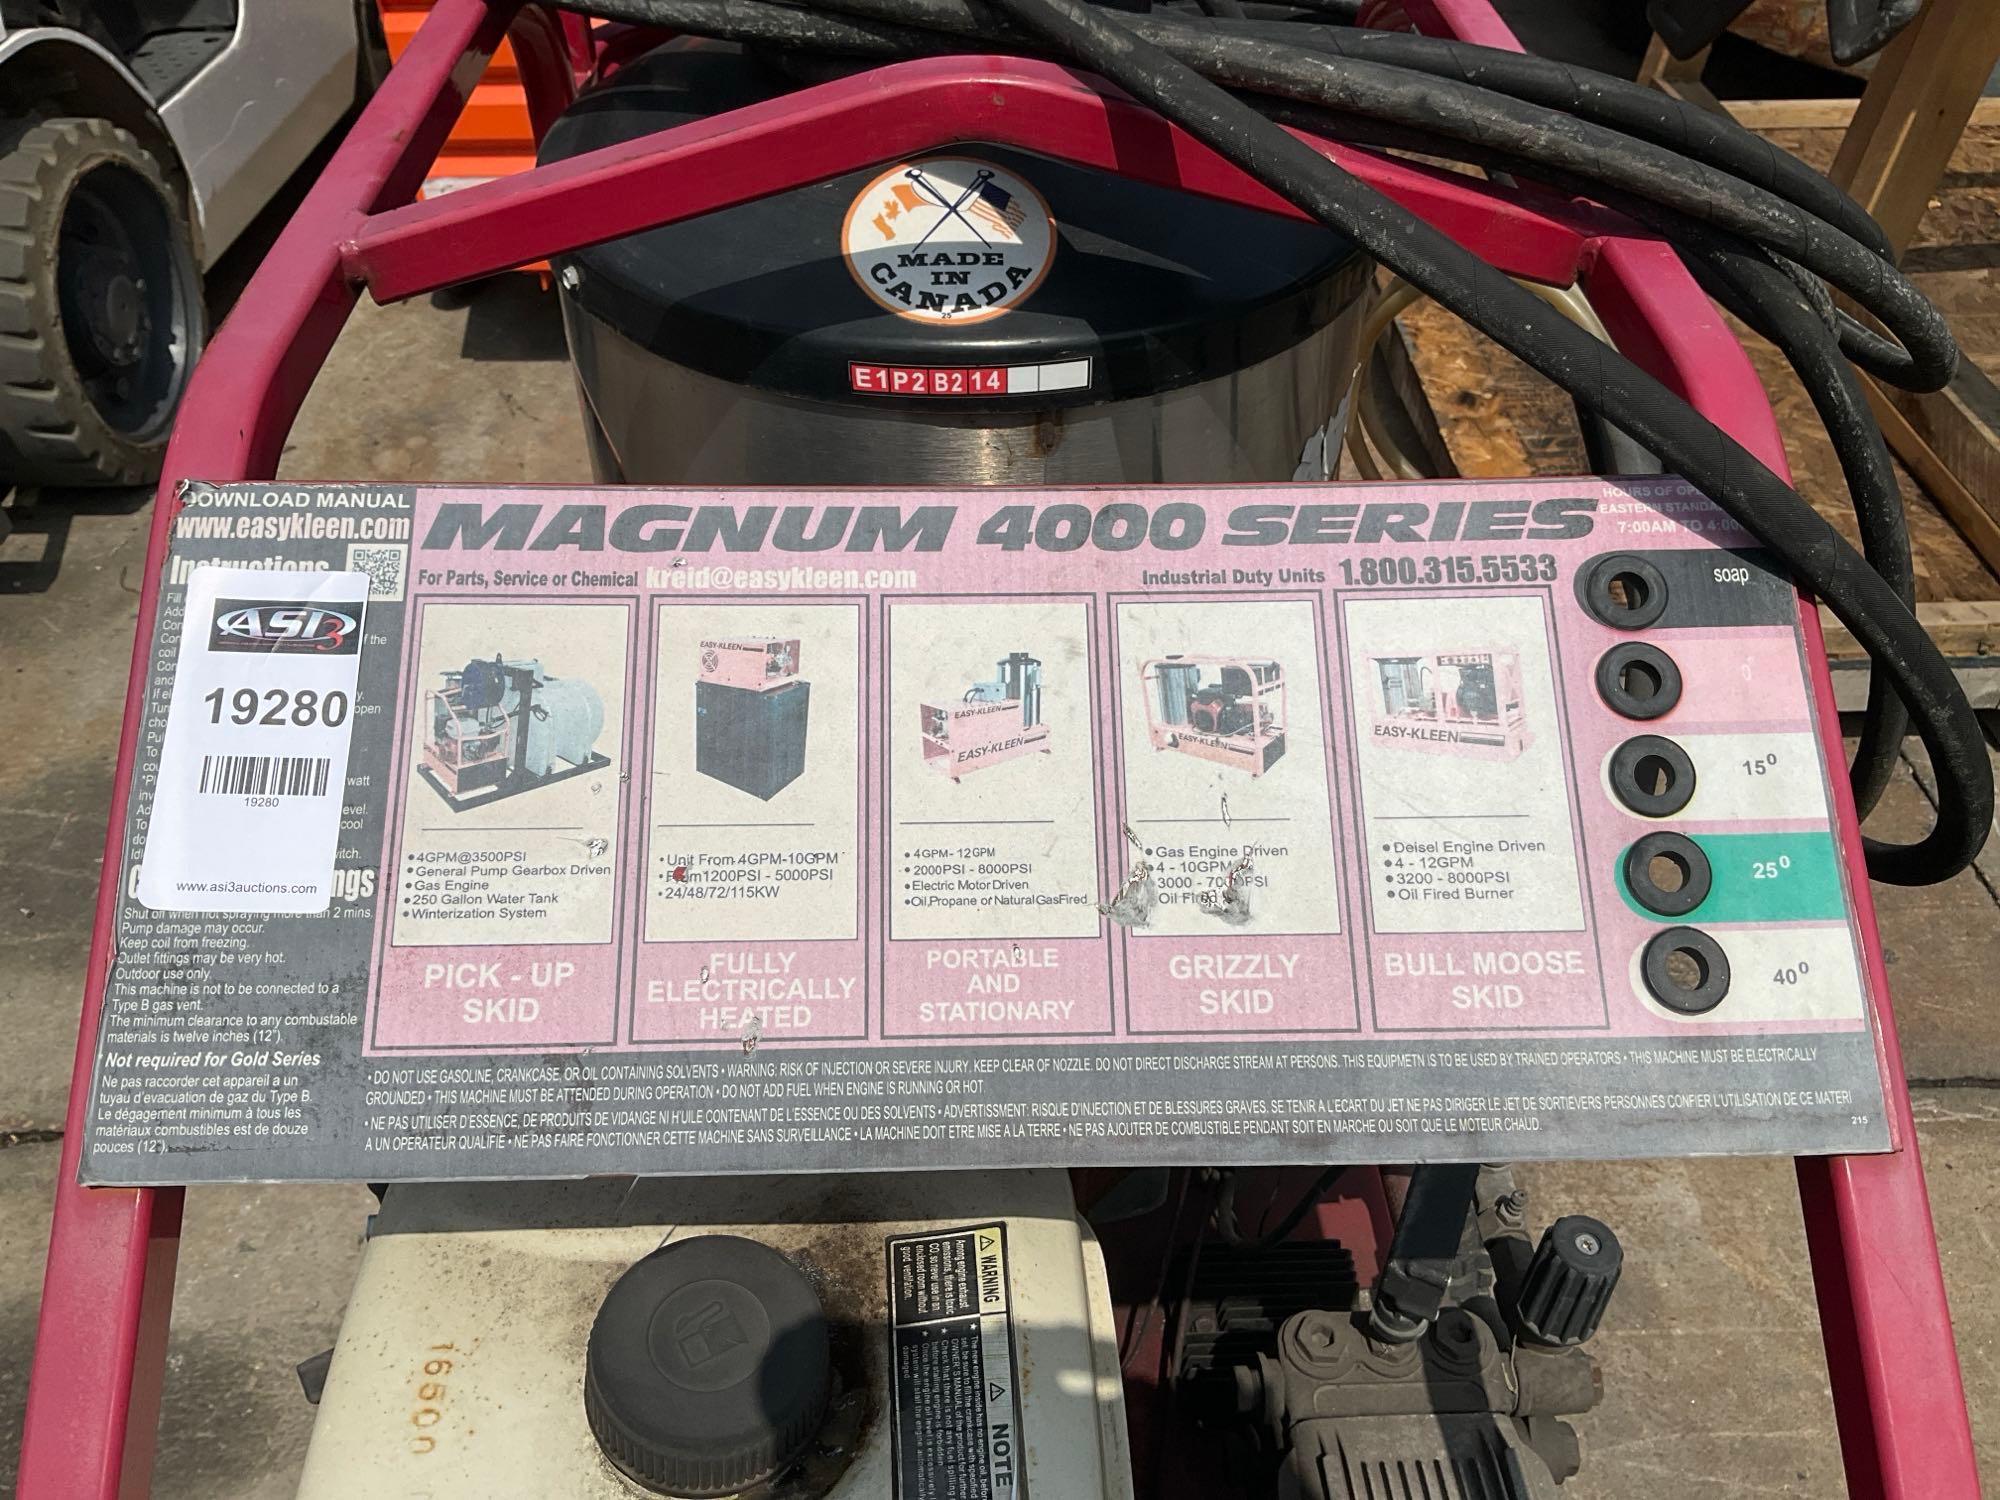 MAGNUM 4000 SERIES GOLD HOT WATER PRESSURE WASHER,DIESEL GAS POWER, ELECTRIC START, APPROX 4000PSI